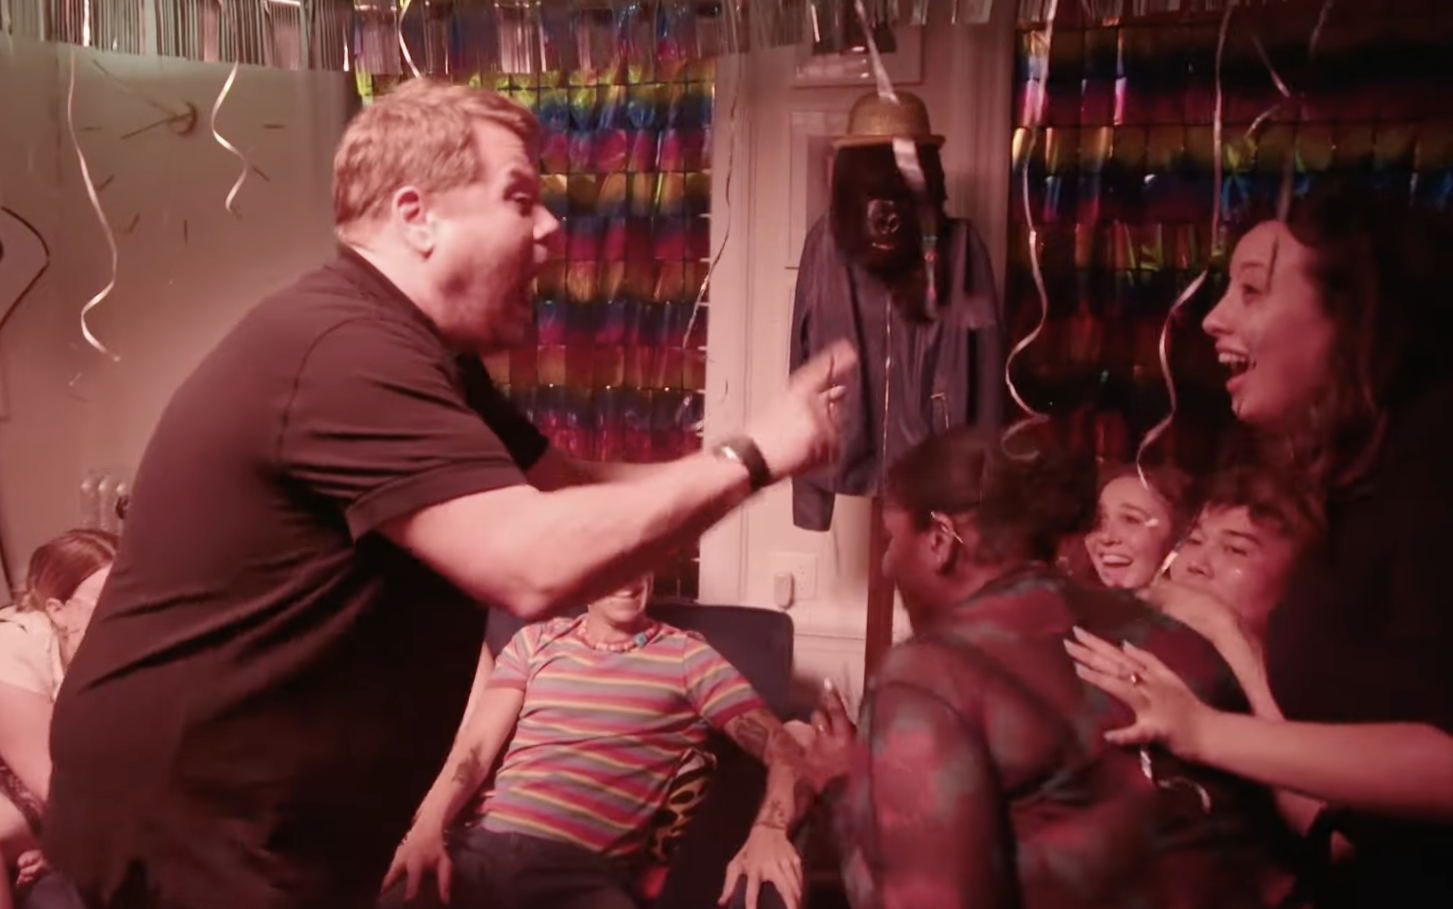 Corden screams at young women surrounded by party decorations